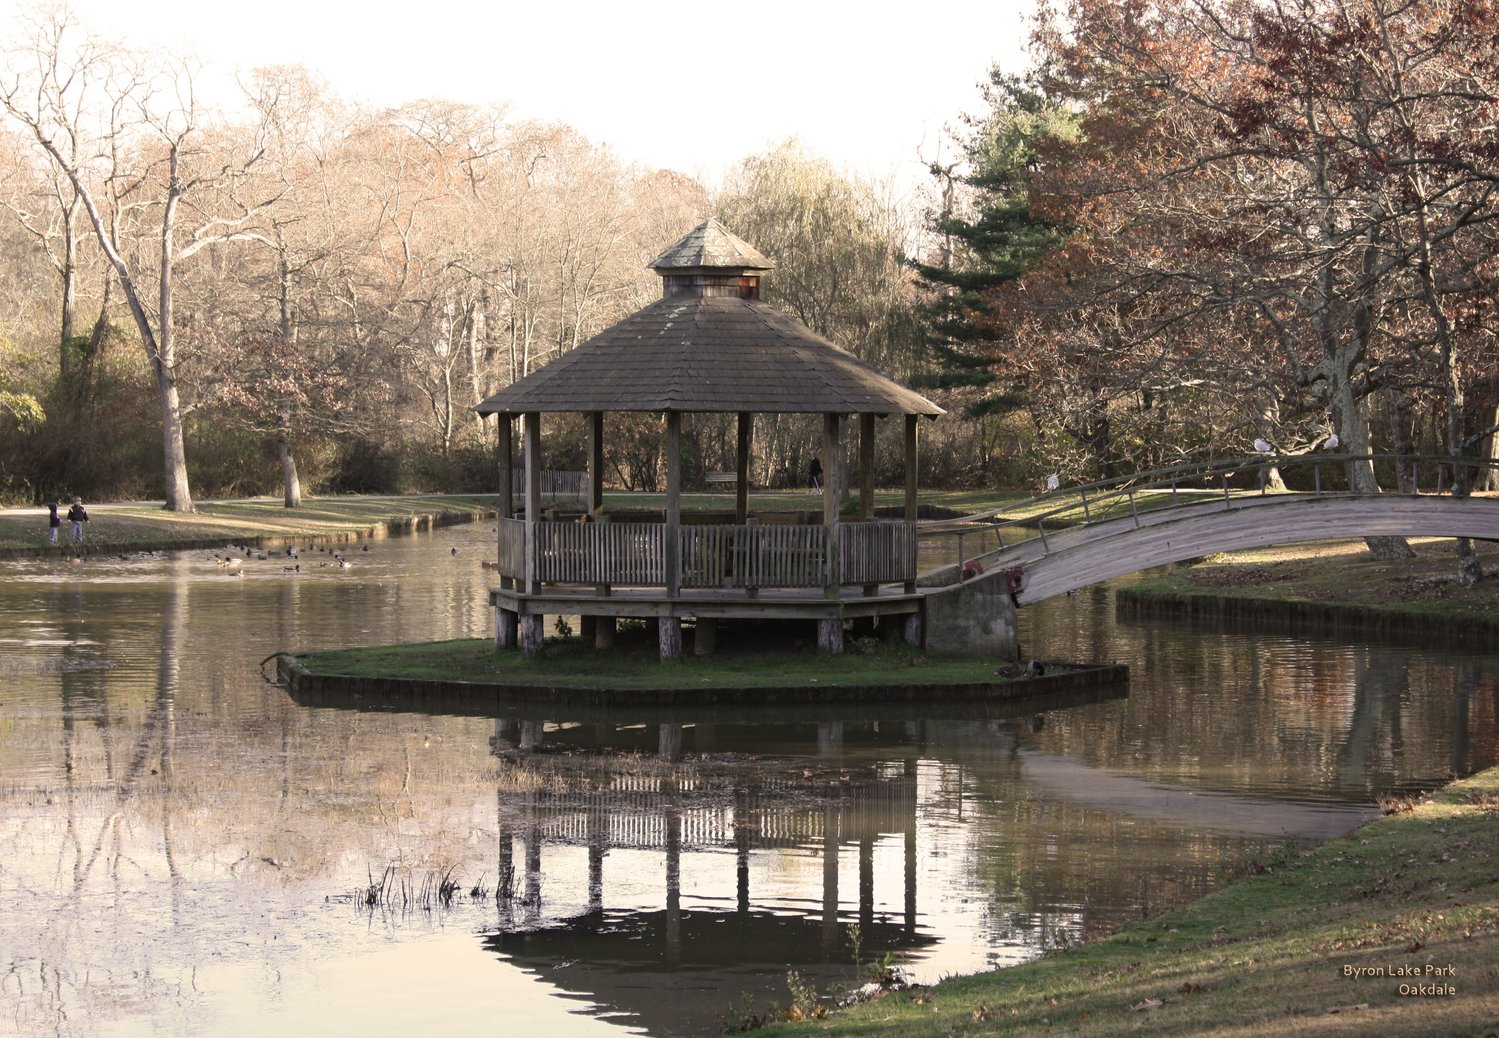 Byron Lake, a treasure for the Oakdale community, will likely see renovations to its pool, but residents are asking for relief with the pond’s issues.